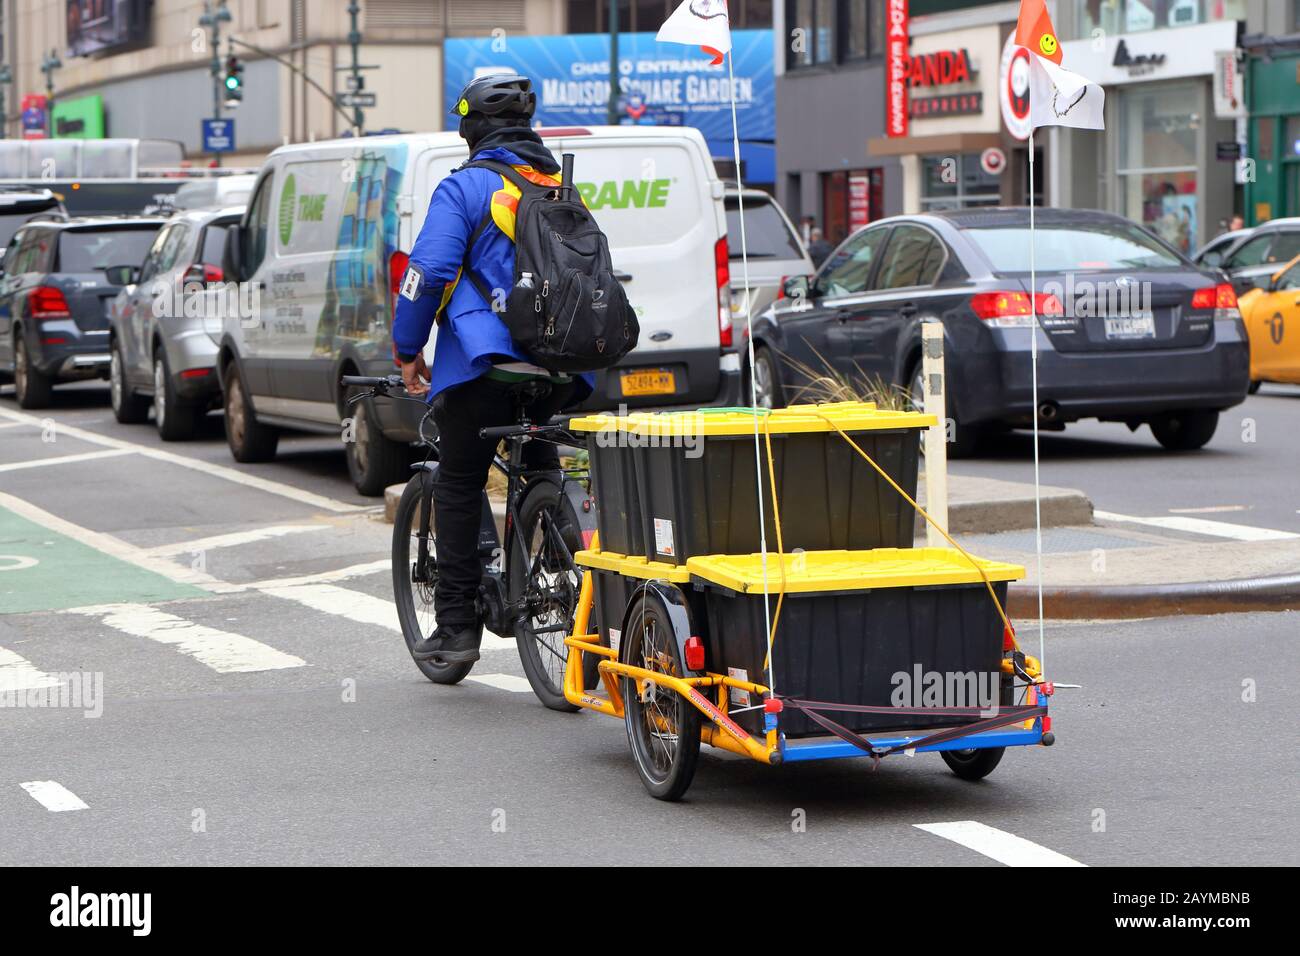 A Whole Foods Market contract bike messenger with an e-bike and Carla Cargo trailer filled with home delivery groceries in New York, NY. Stock Photo